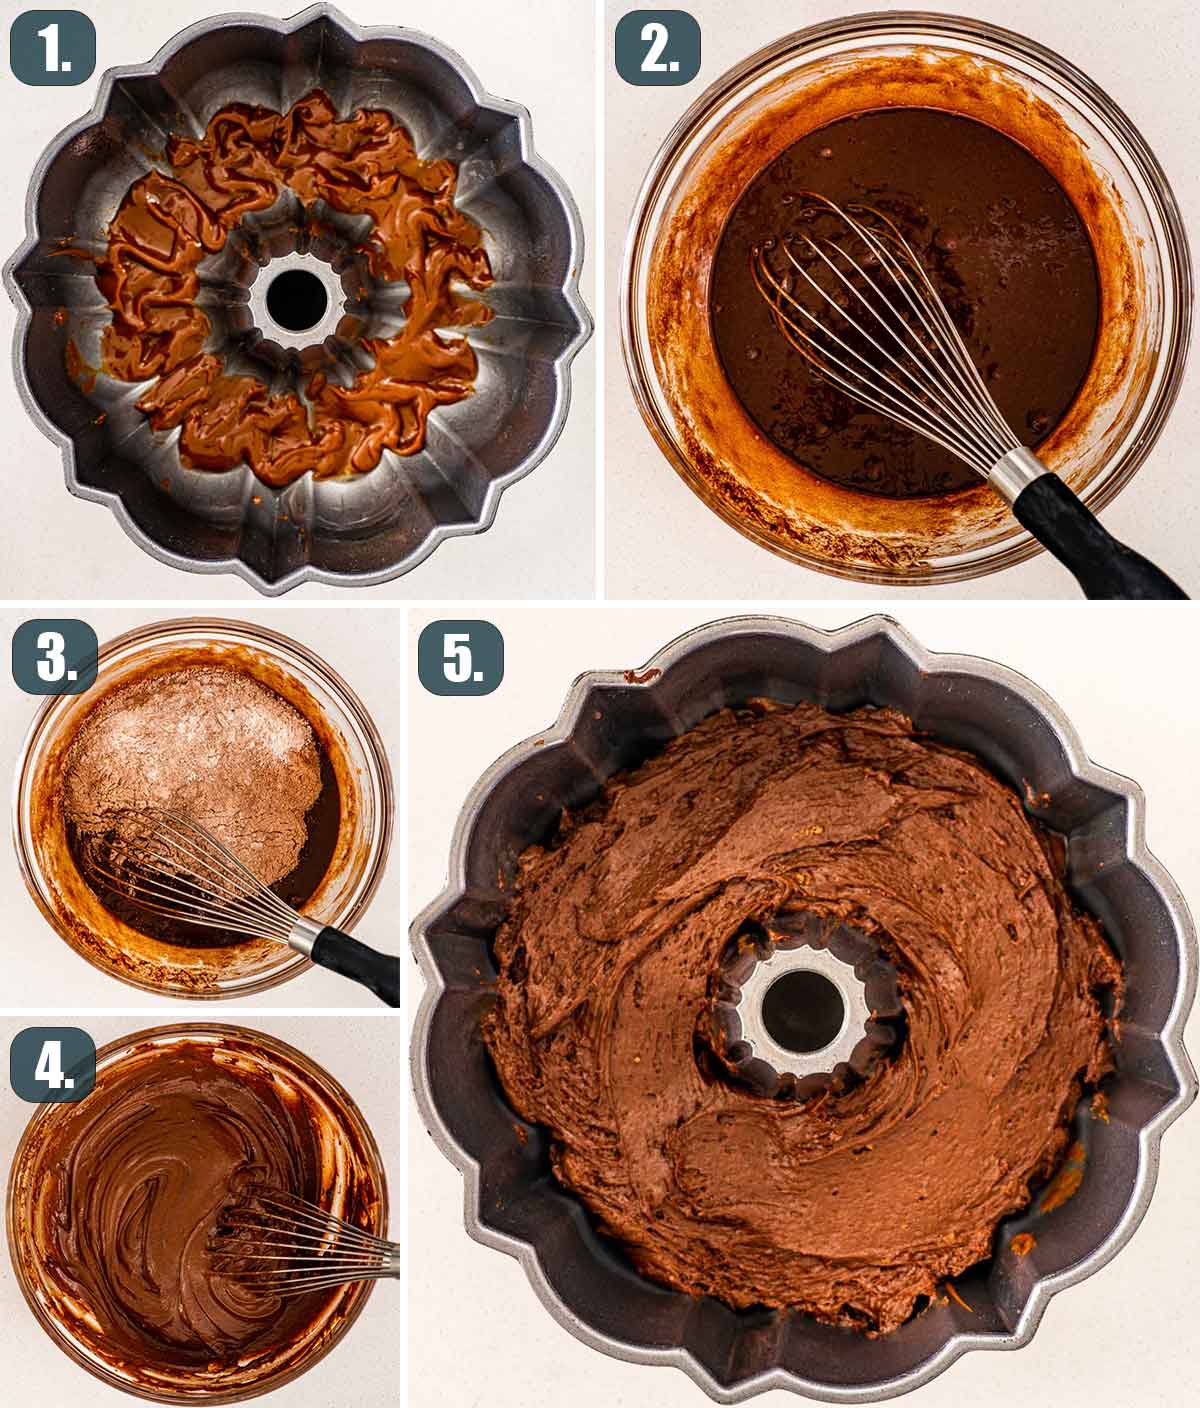 process shots showing how to make chocolate batter for magic flan cake.